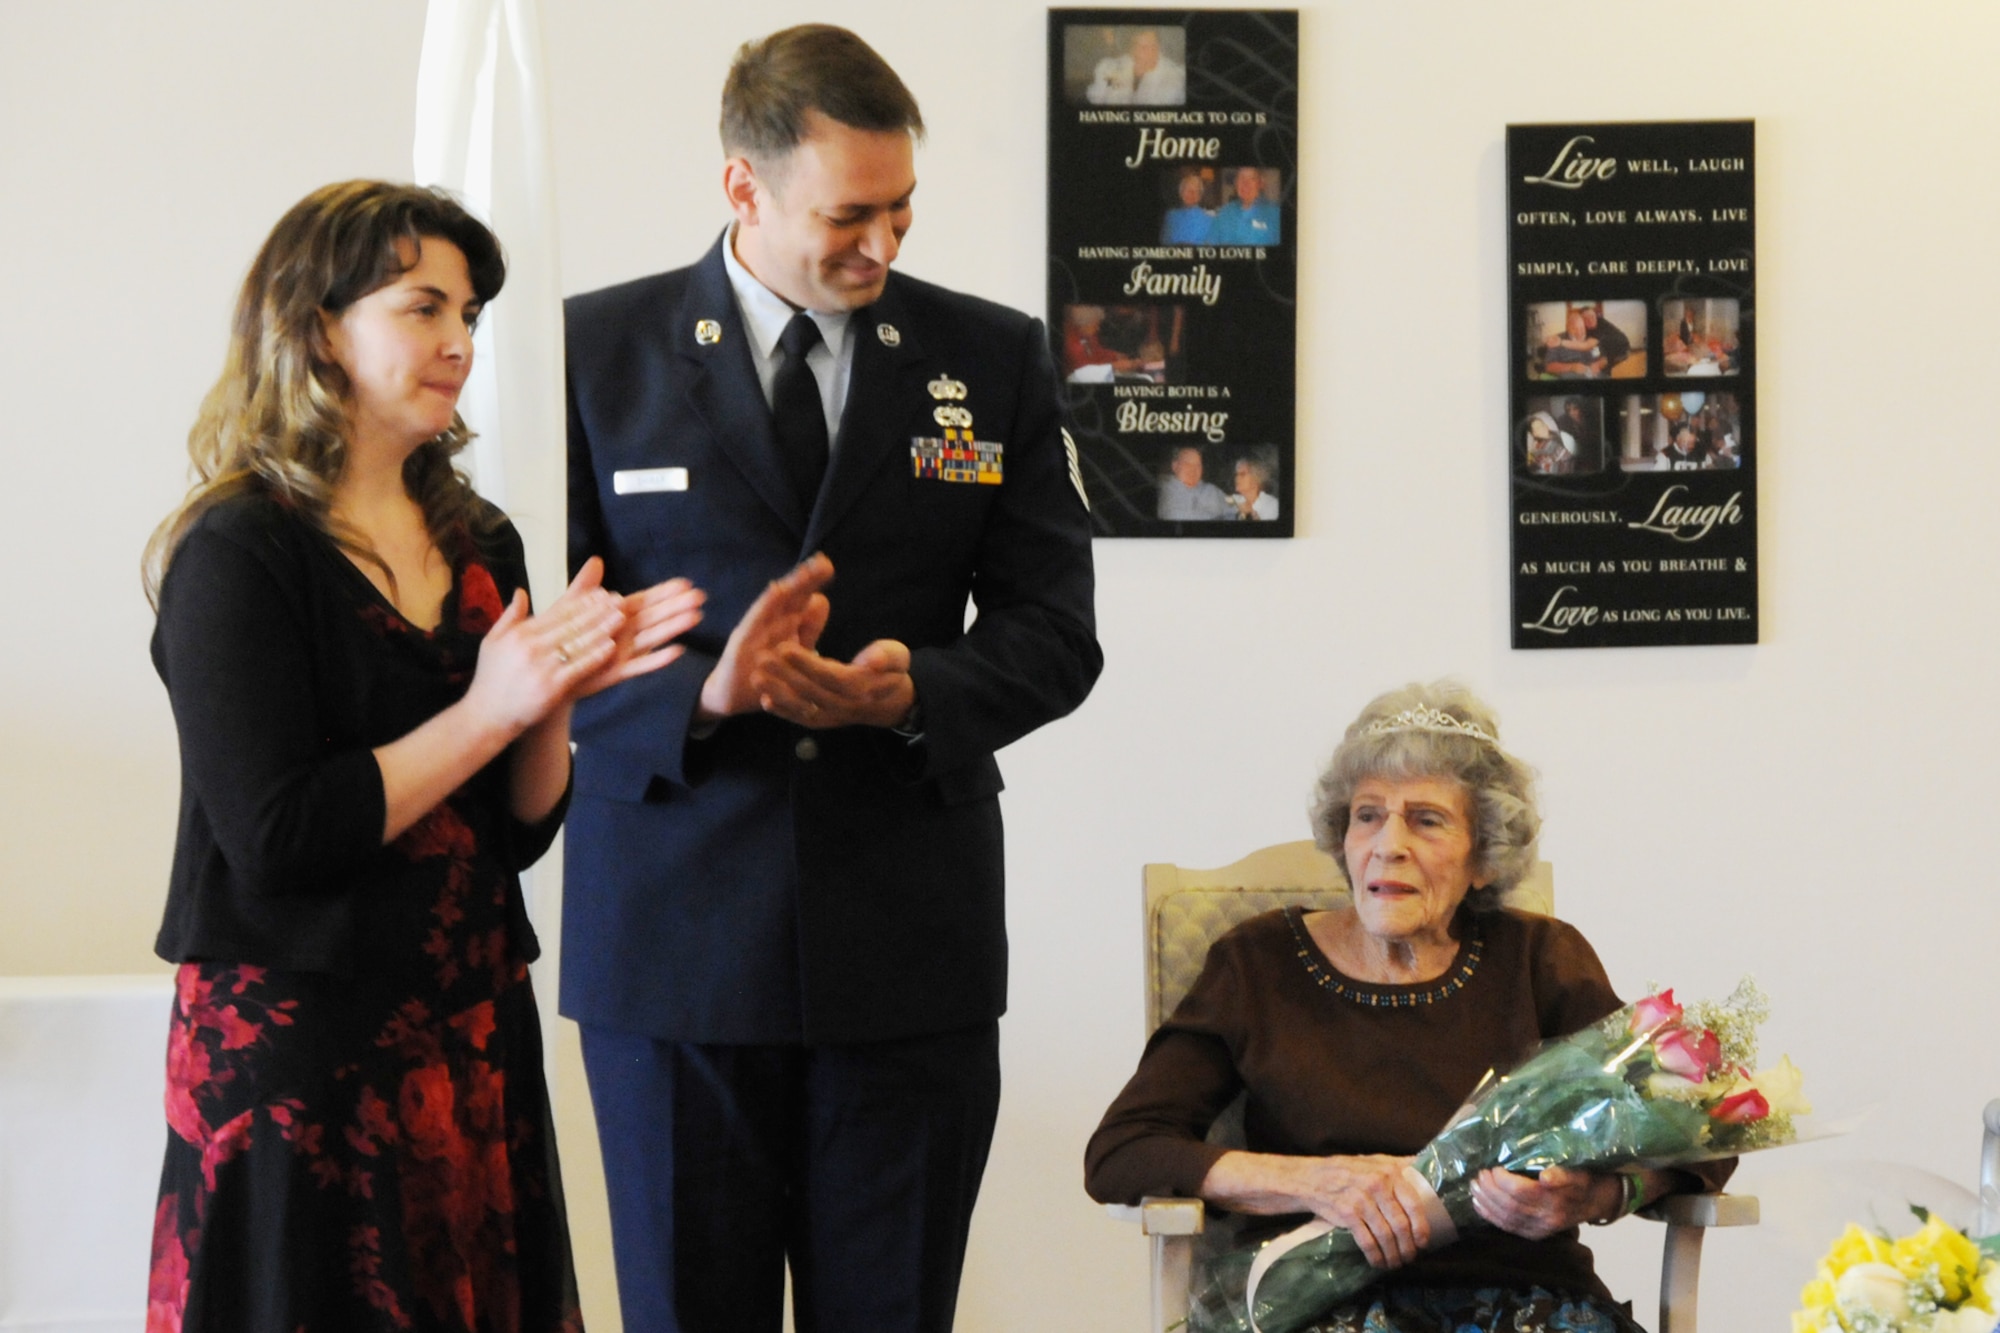 Tech. Sgt. Michael Shirar, 173rd Fighter Wing Maintenace Training Manager, and Tammy Smeed, Plum Ridge Marquis Care Activitites Director, clap for Mrs. Irene Dalton, the 2011 Rose Queen Princess, during the ceremony.  Members of the Oregon Air National Guard volunteered to help with the 2011 Rose Queen Corenation ceremony at Plum Ridge Marquis Care in Klamath Falls, Ore. April 8, 2011. (U.S. Air Force Photo by Tech.Sgt. Jennifer Shirar, RELEASED)
